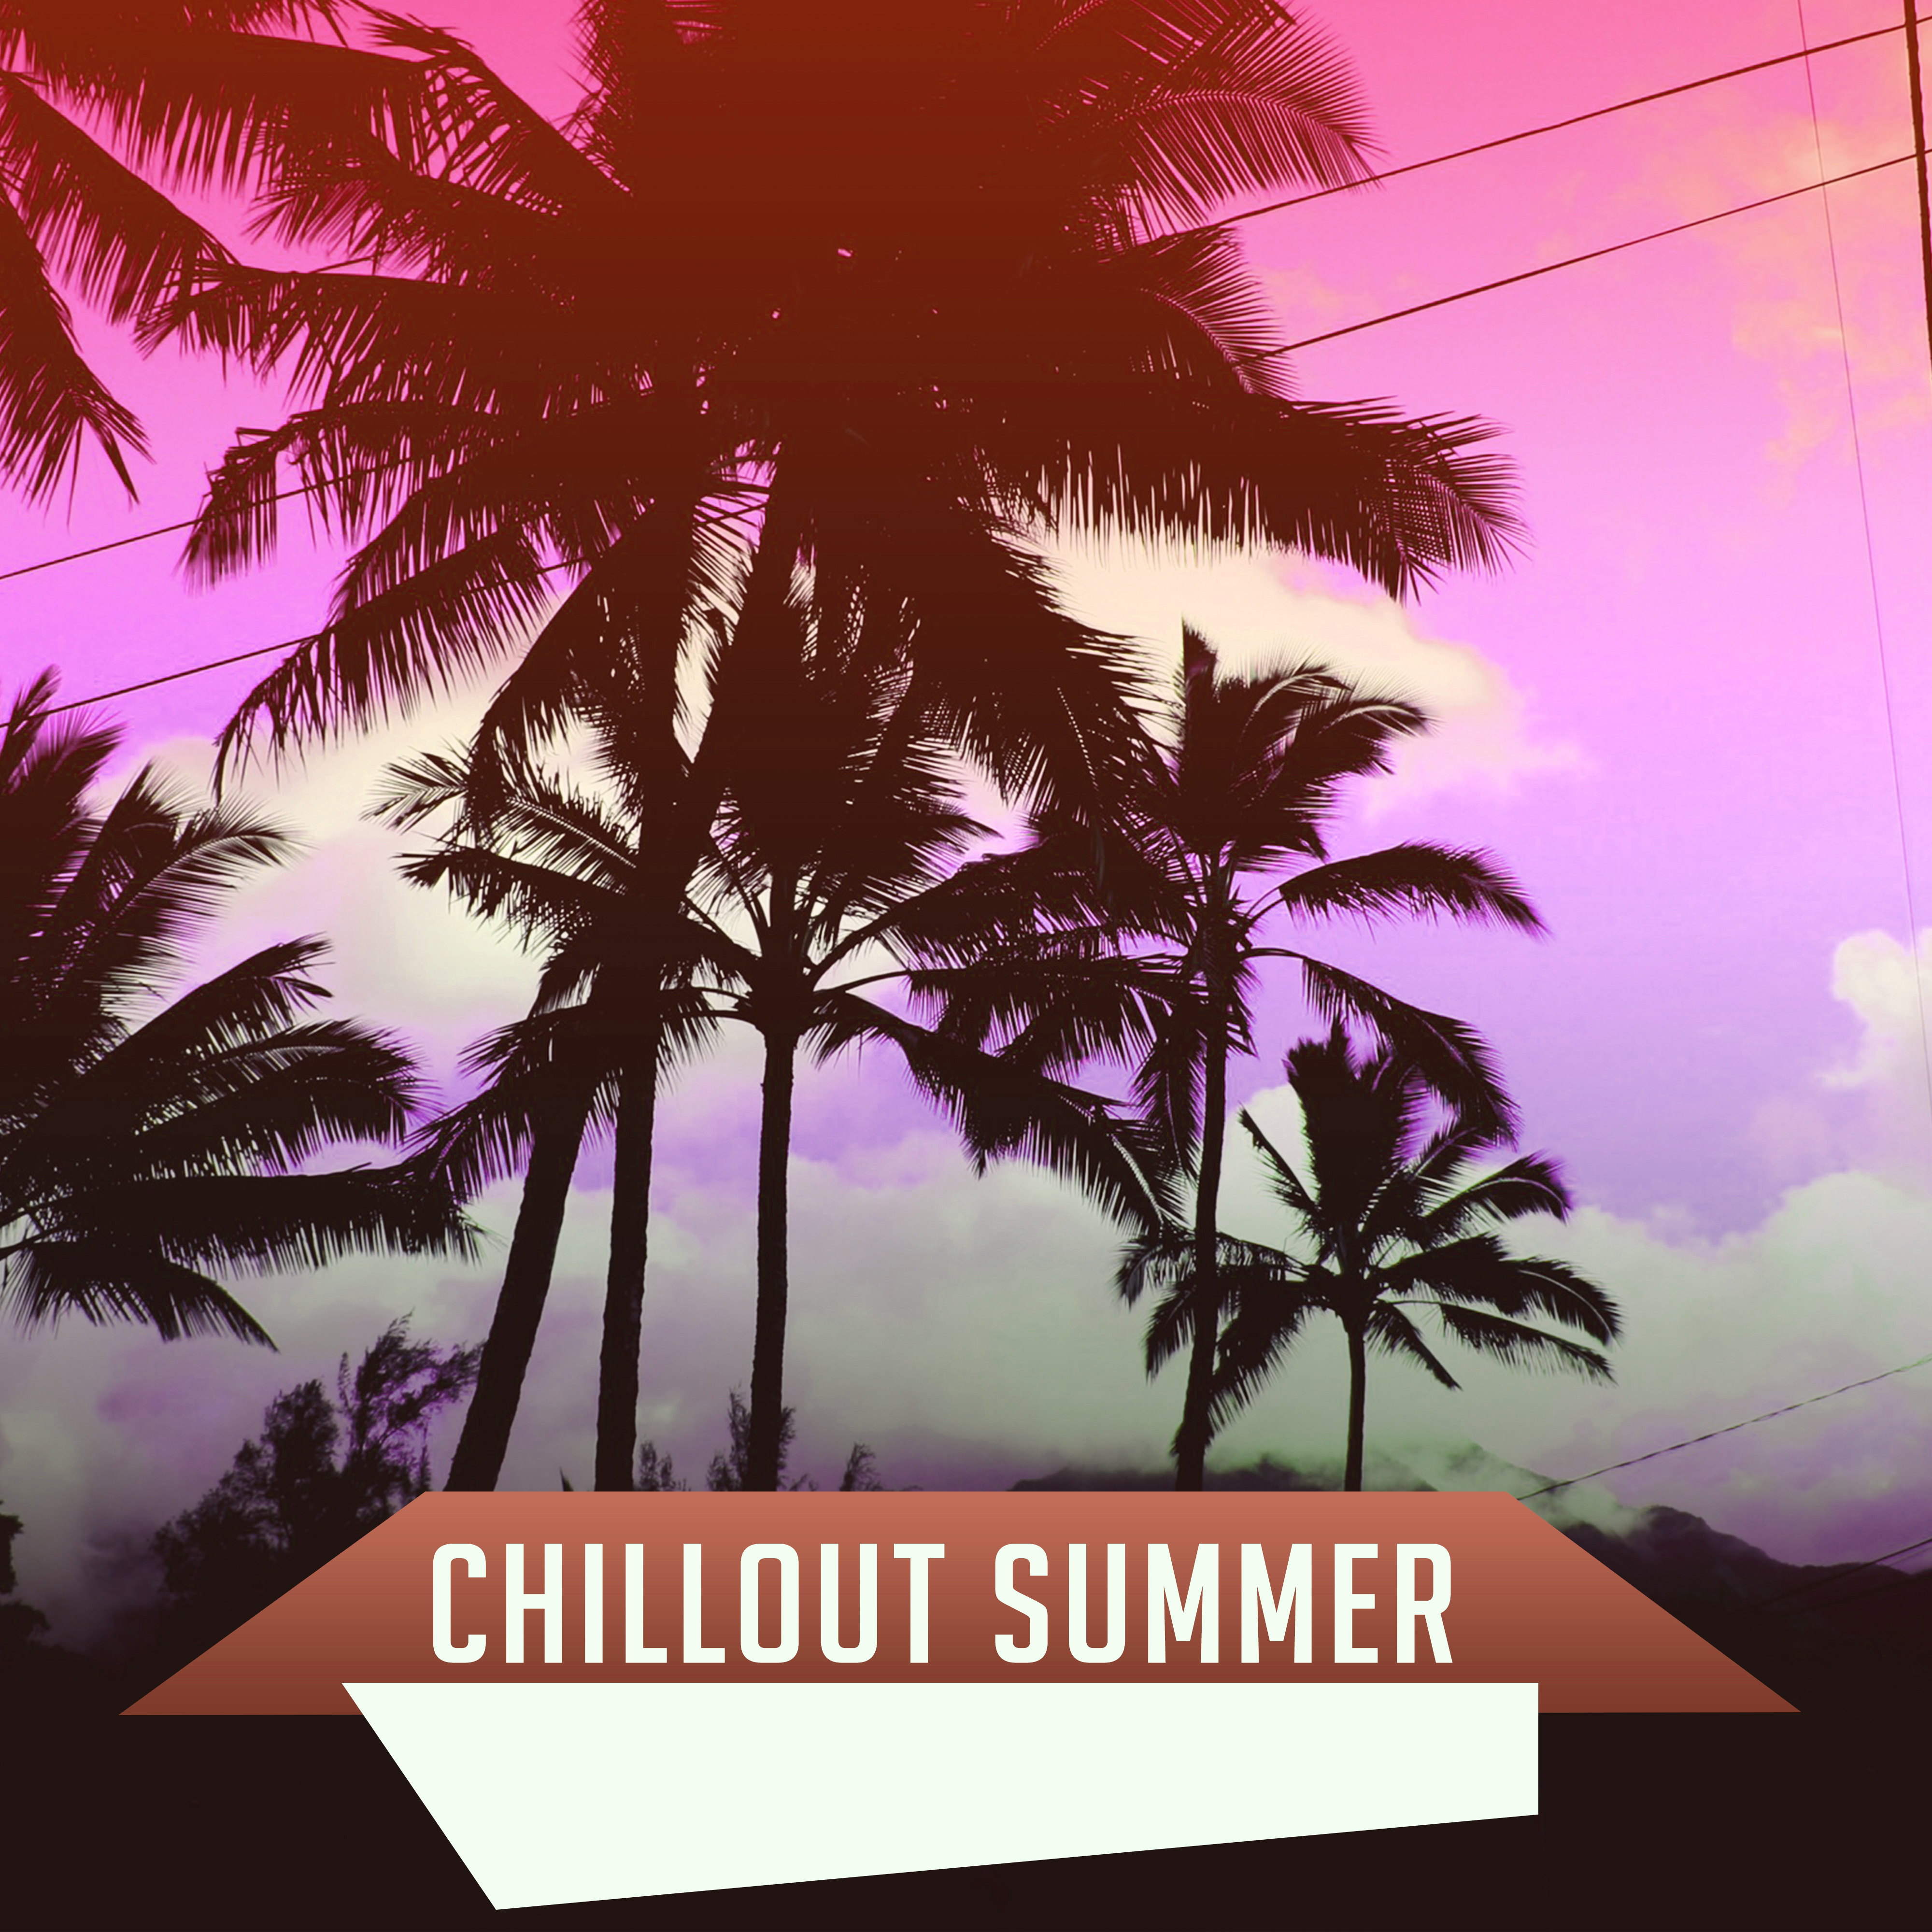 Chillout Summer  Music 4 Ever, Beach Party, Relax, Ibiza Lounge, Afterhours Chill